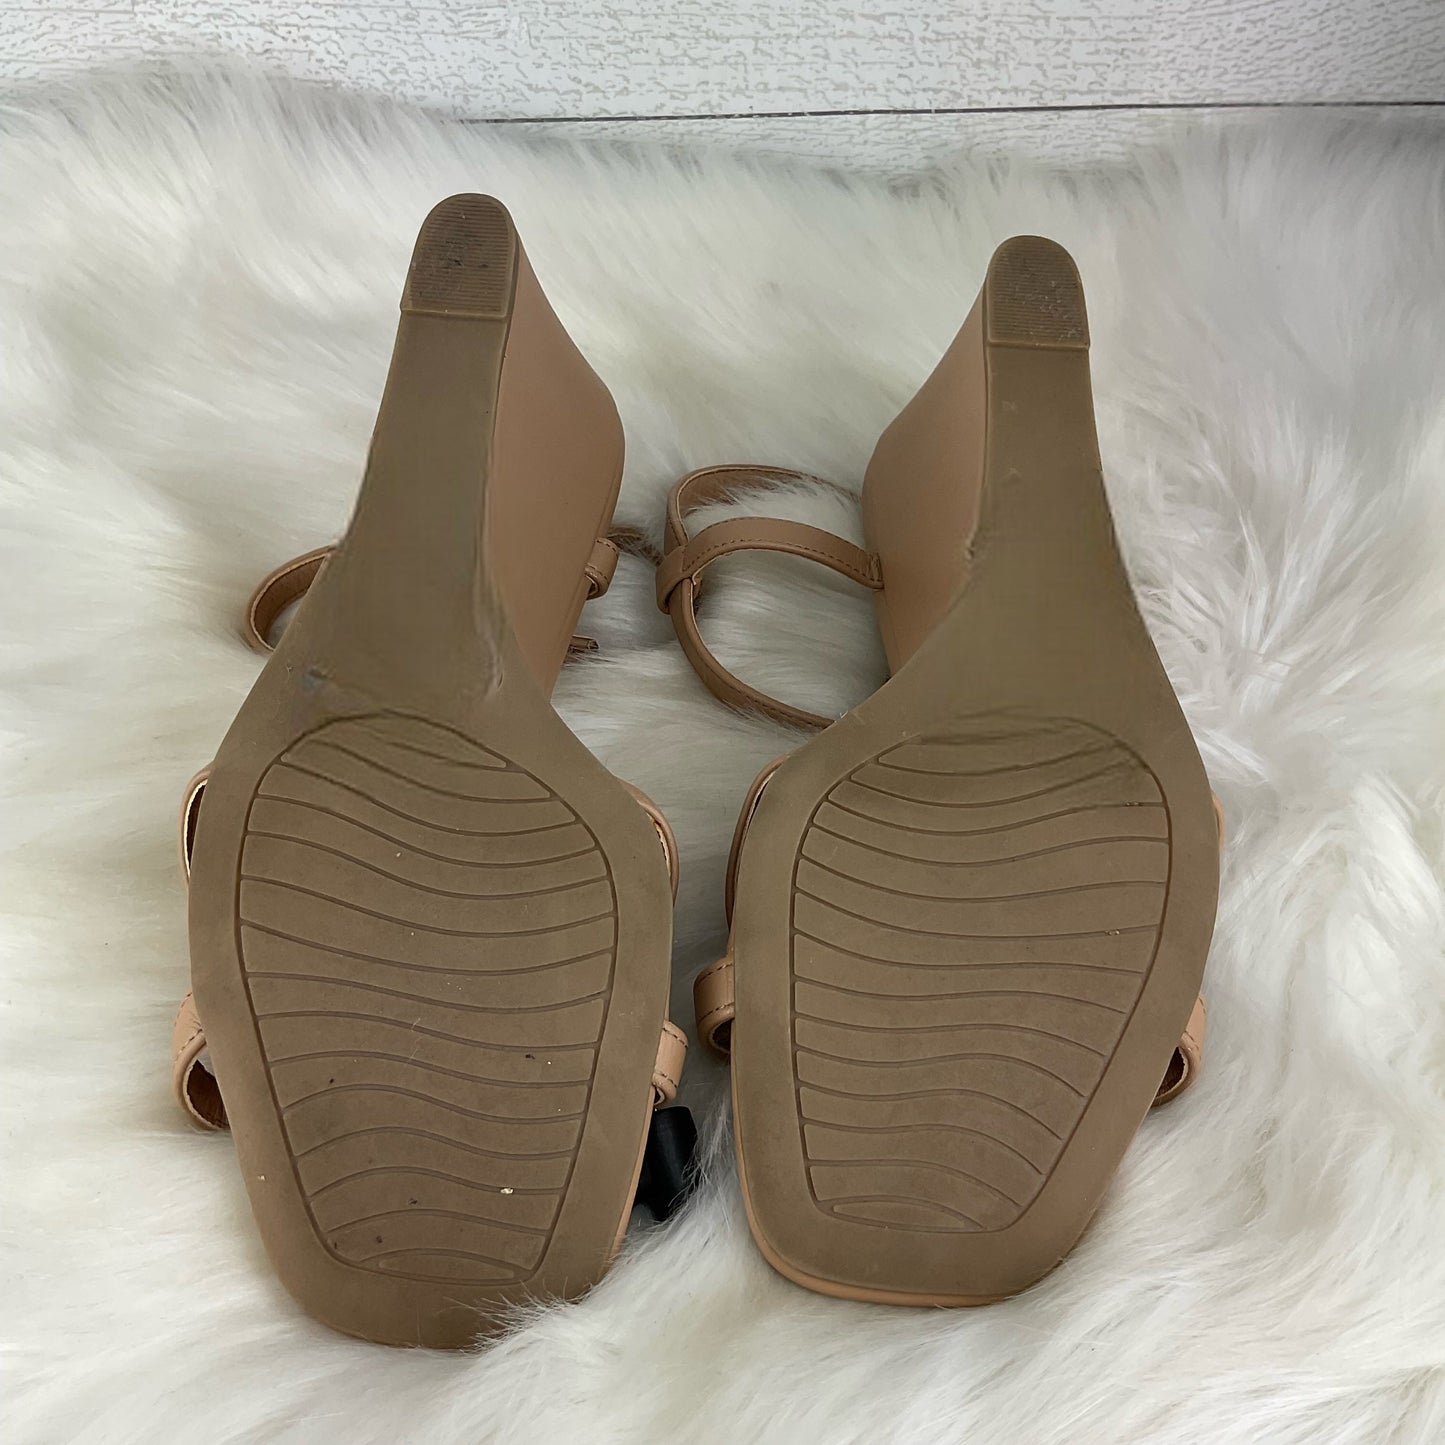 Sandals Heels Wedge By Michael Shannon  Size: 9.5